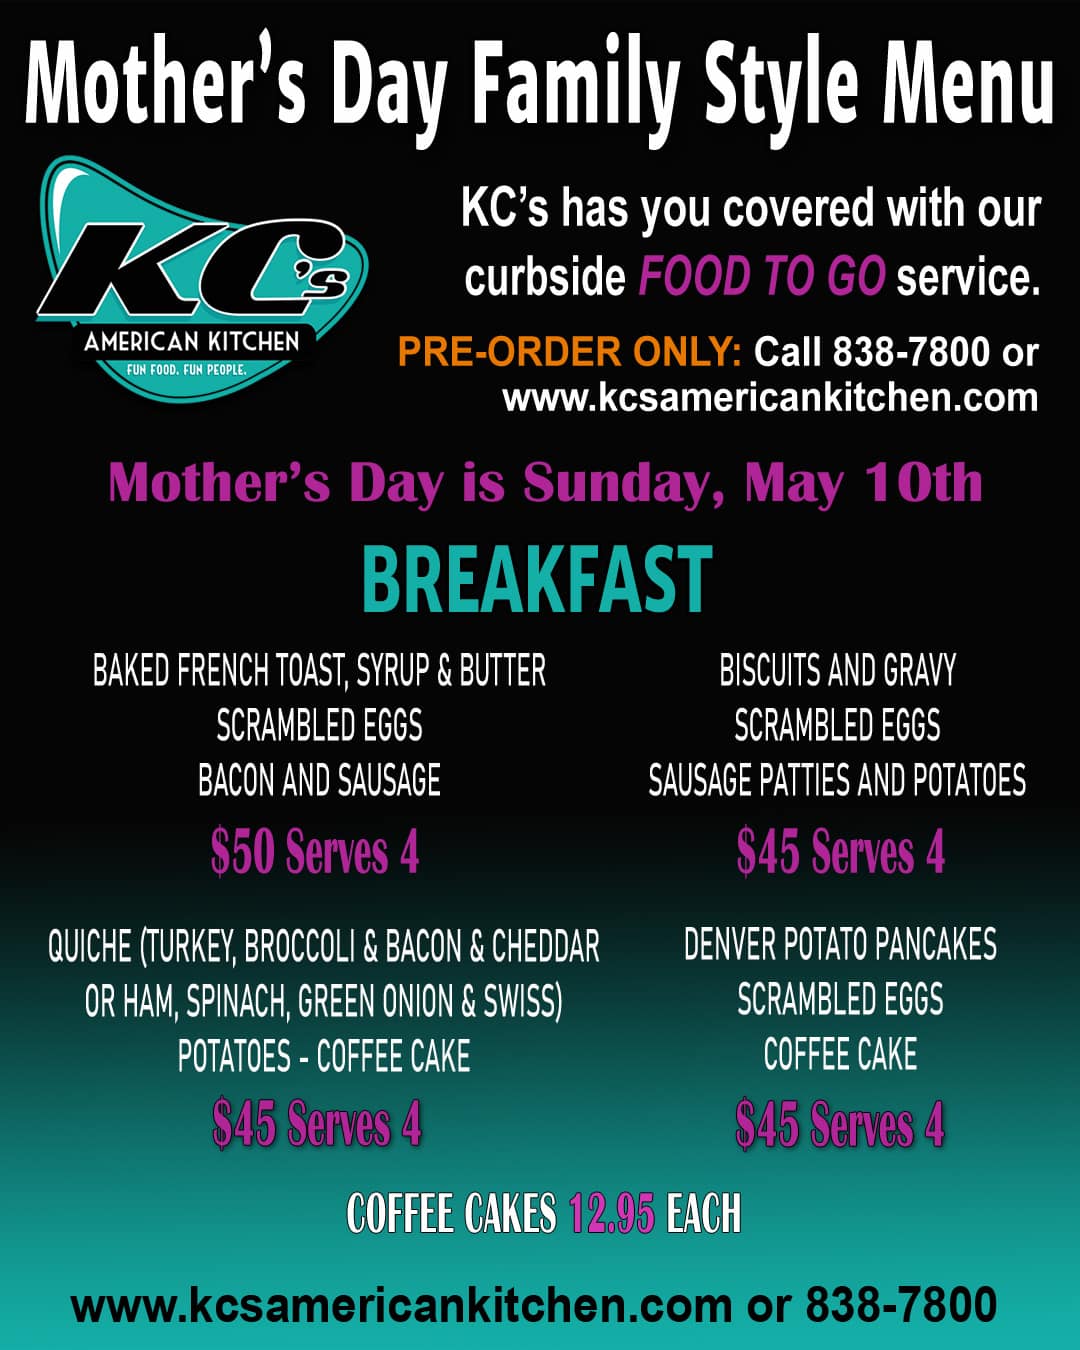 Mother's Day breakfast to go at KC's American Kitchen in Windsor, CA.